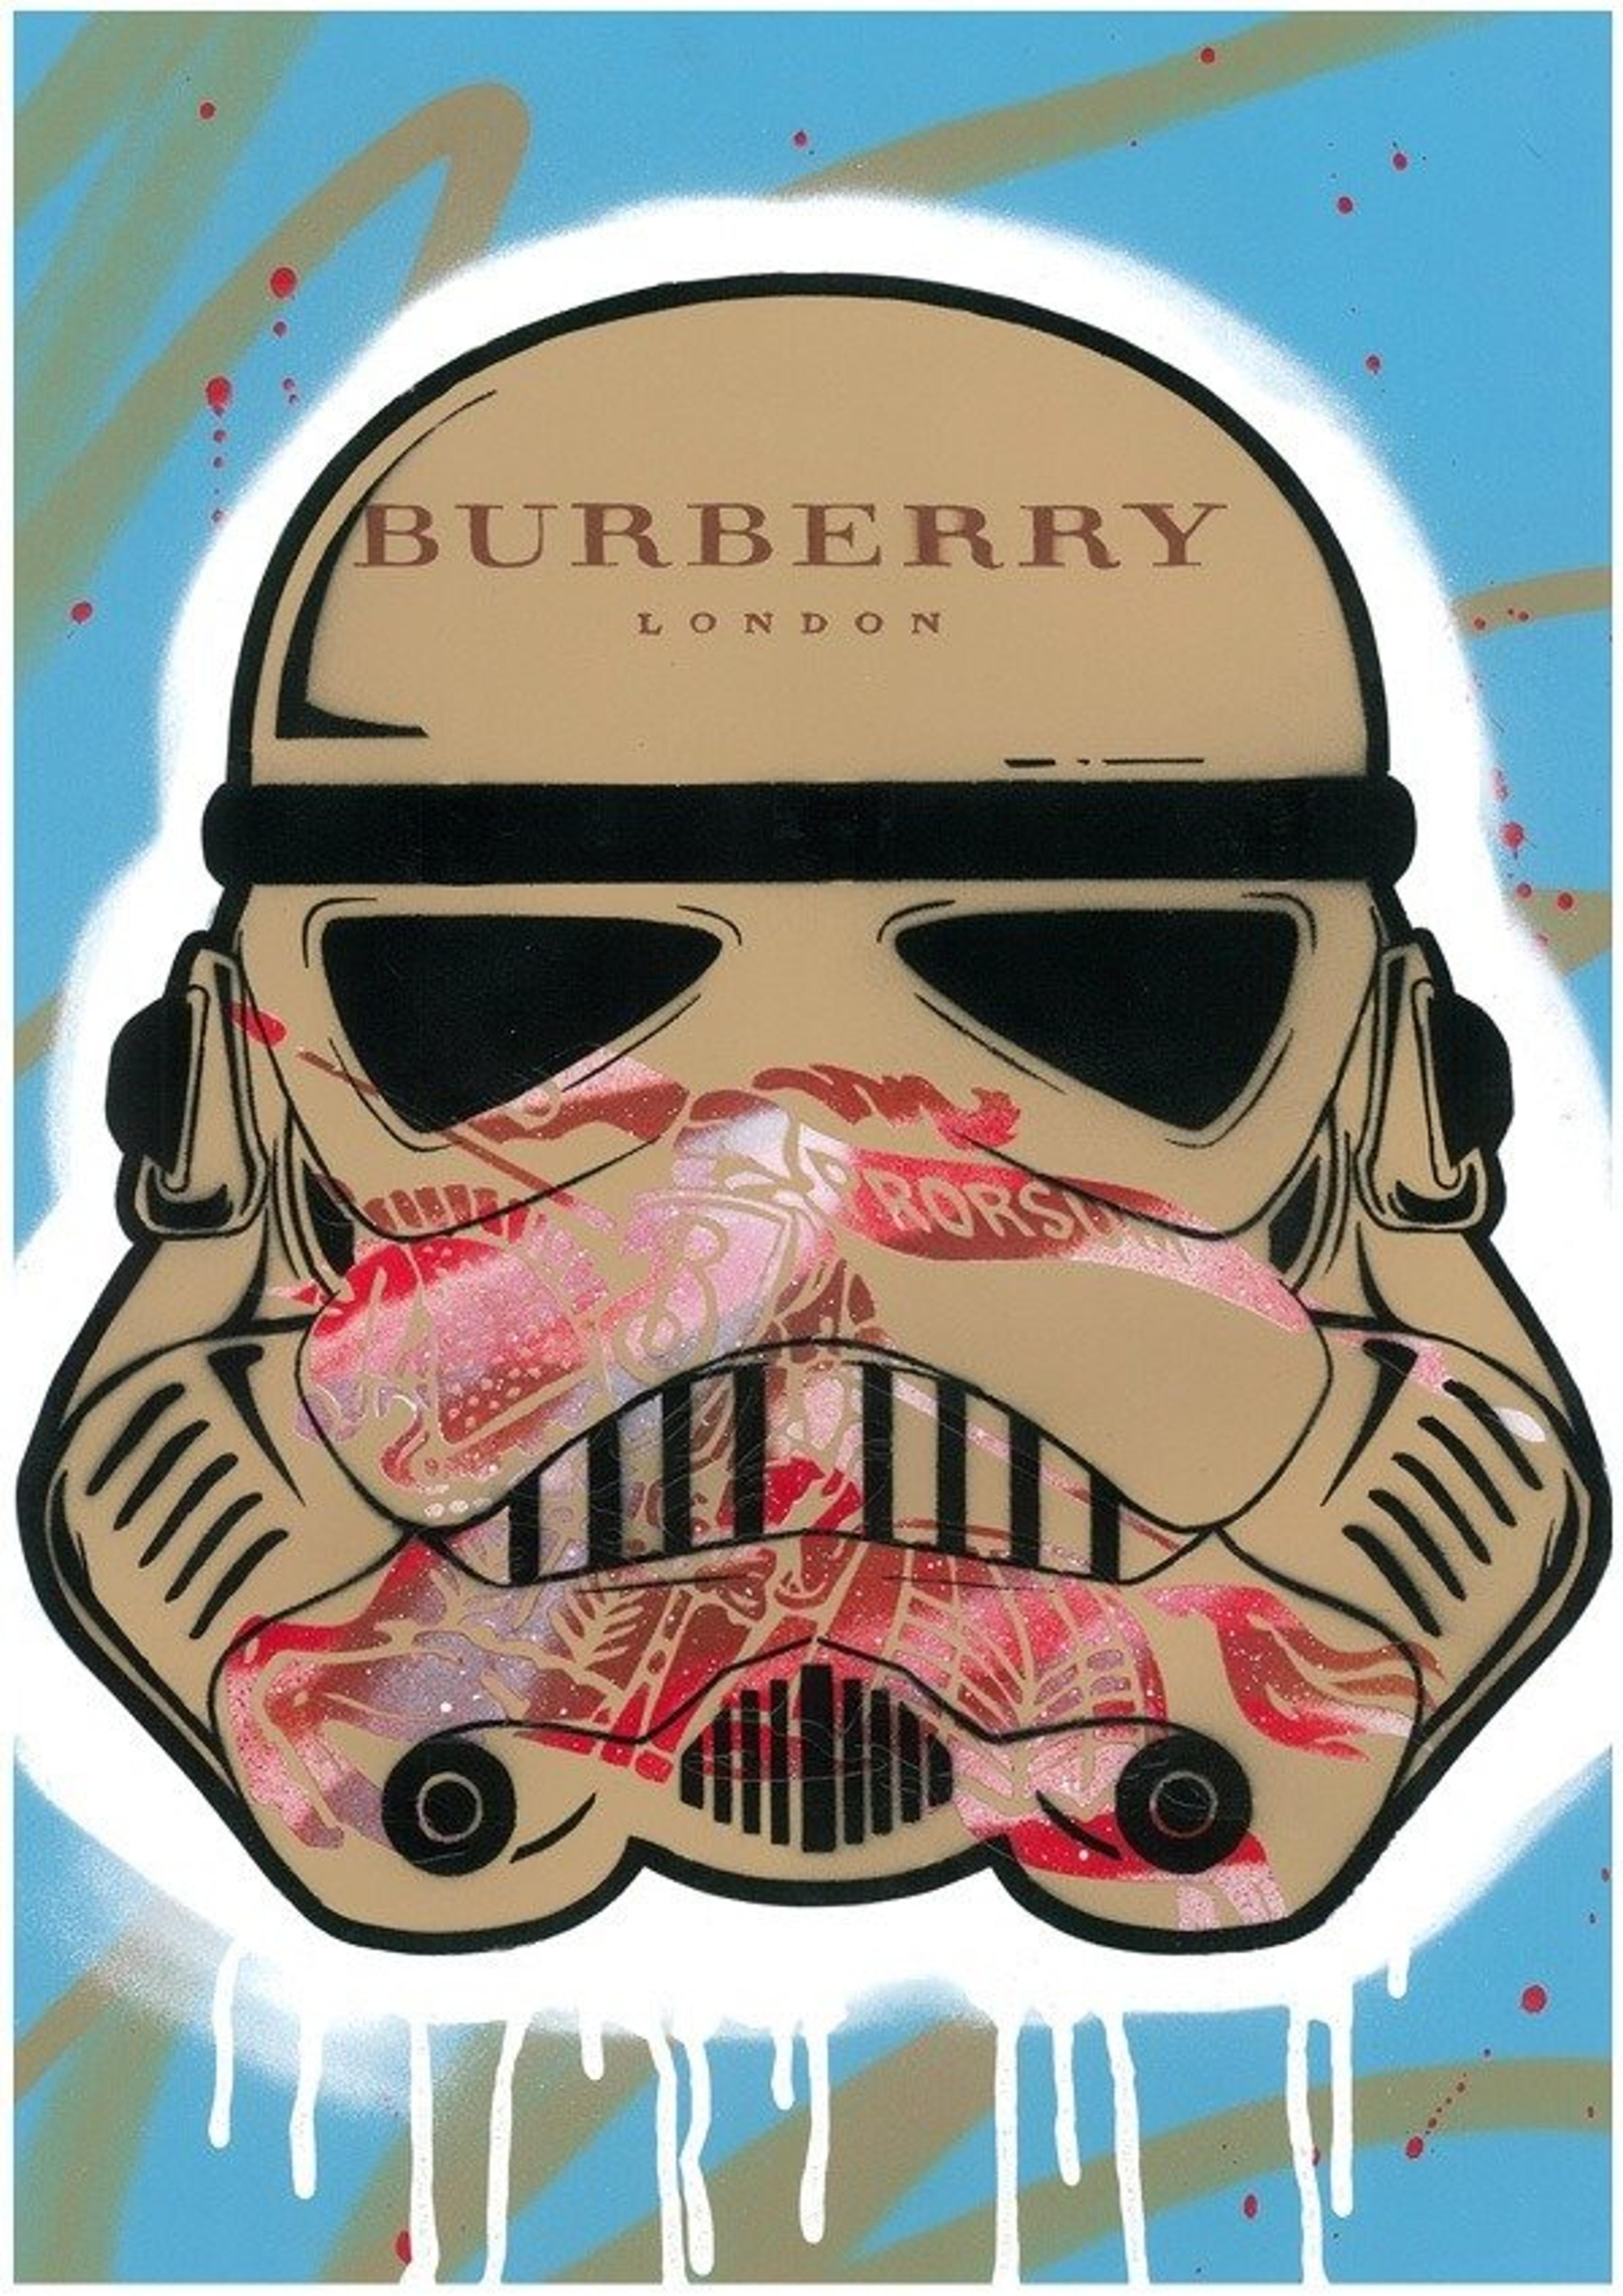 Imperial Burberry